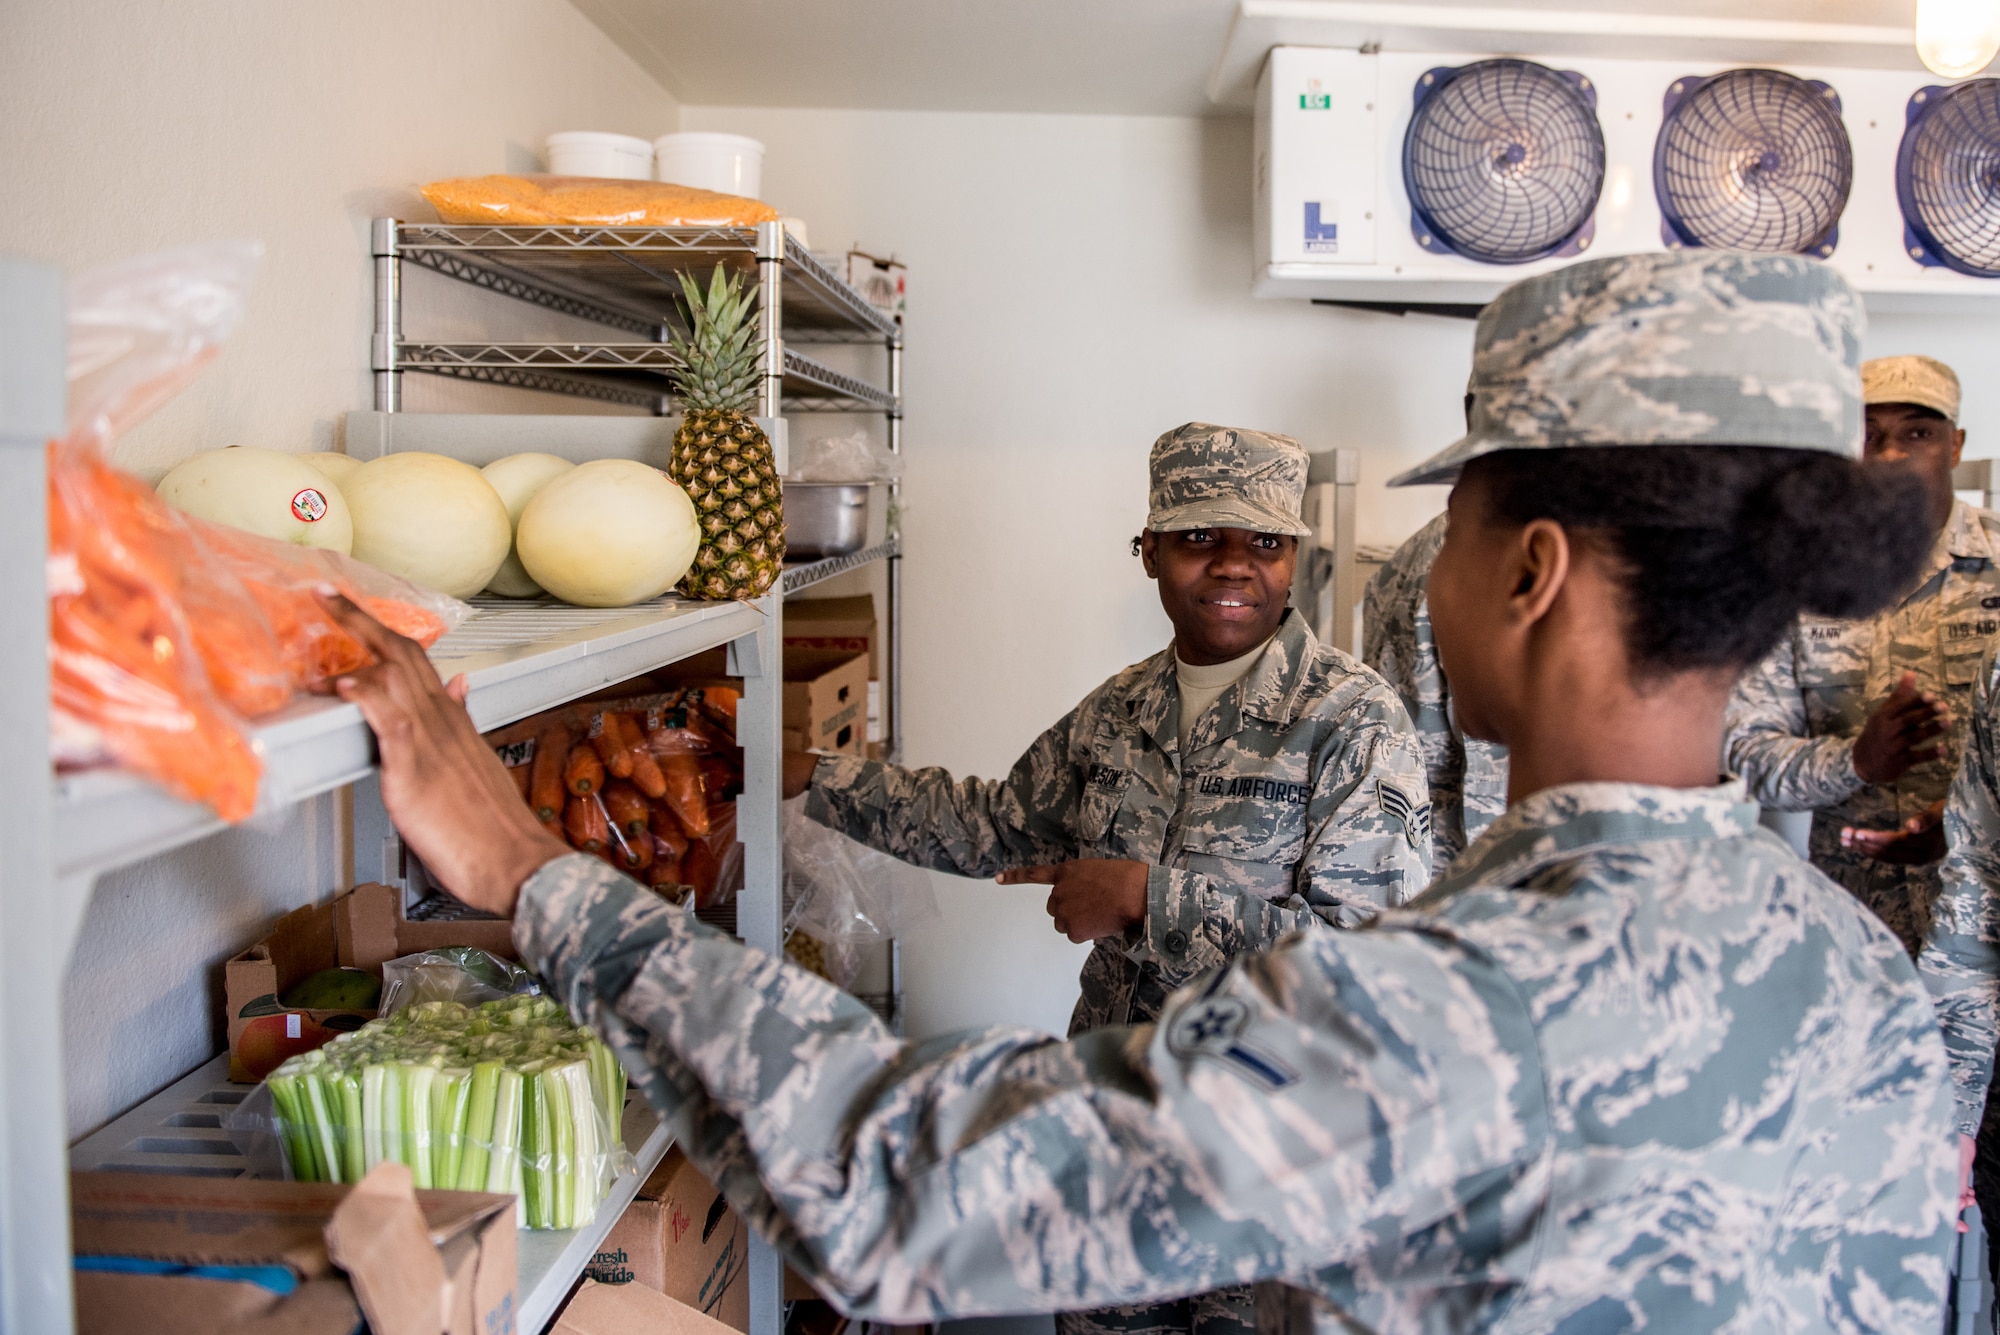 Airmen assigned to the 512th Memorial Affairs Squadron conduct a food inventory during the 2019 John L. Hennessy competition at Dobbins Air Reserve Base, Georgia, March 8, 2019. Competing teams were tasked with ordering food for their menus two months prior to the competition on March 9. (U.S. Air Force photo by Staff Sgt. Damien Taylor)